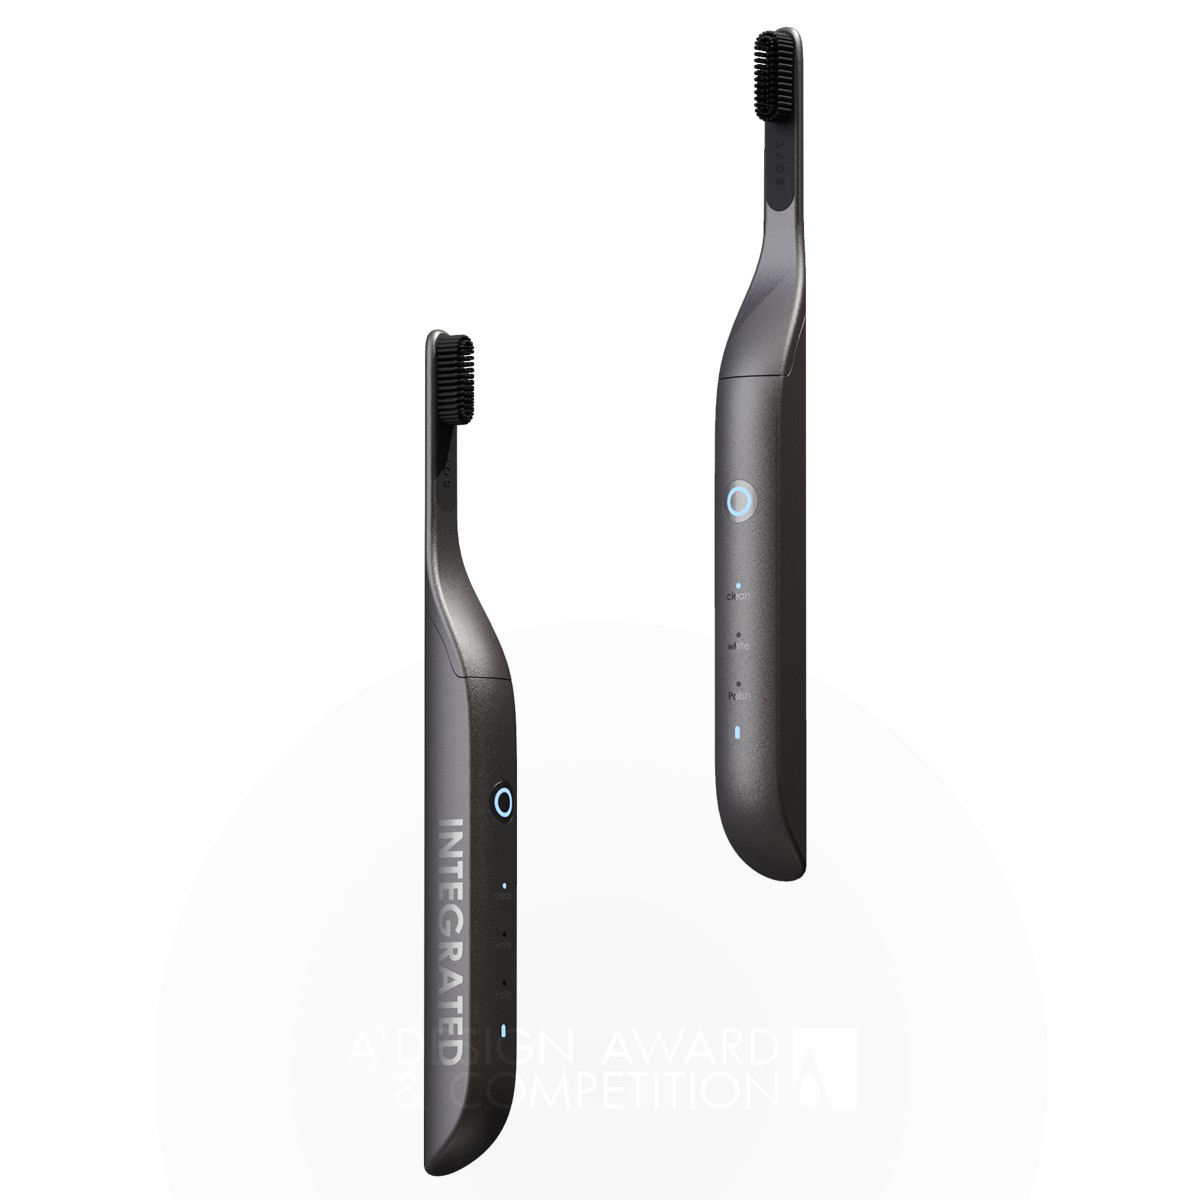 Isotopetc Electric Toothbrush by Tianyi Huang Iron Beauty, Personal Care and Cosmetic Products Design Award Winner 2024 